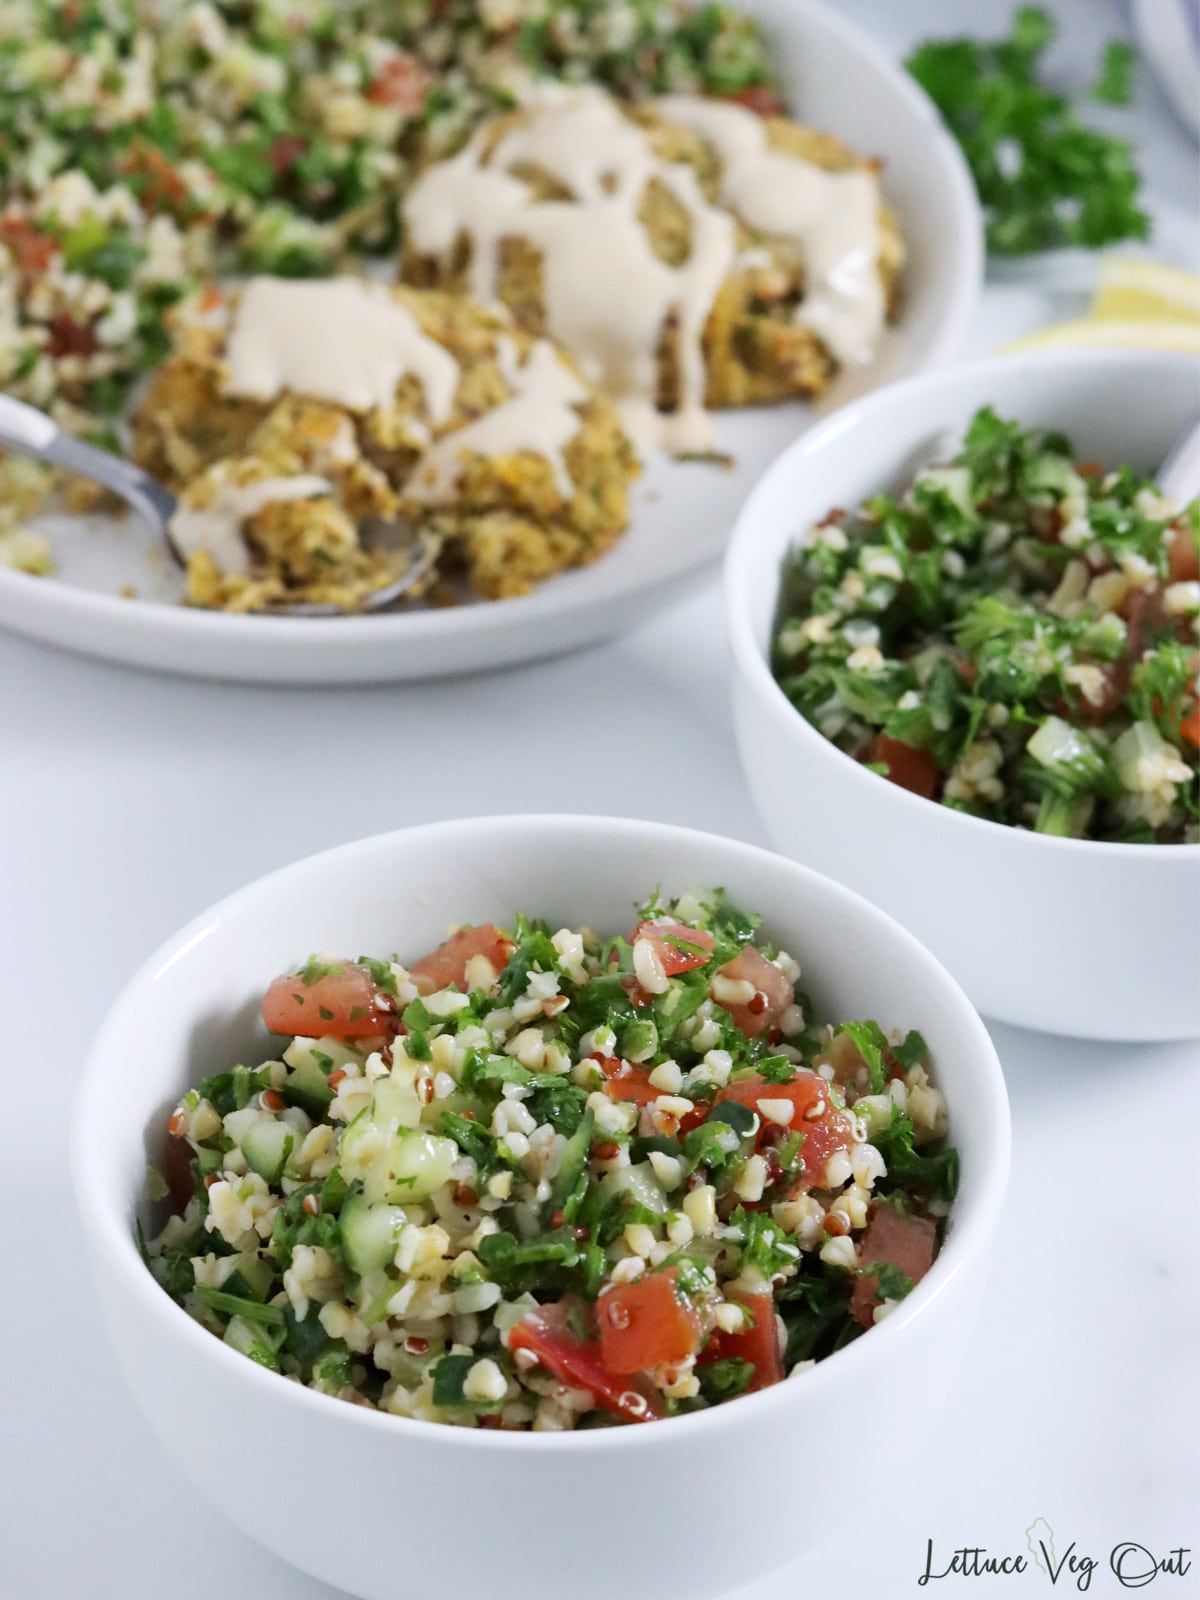 Two small bowls of tabbouleh salad (bulgur, parsley, tomato, onion) with plate of falafel in back.